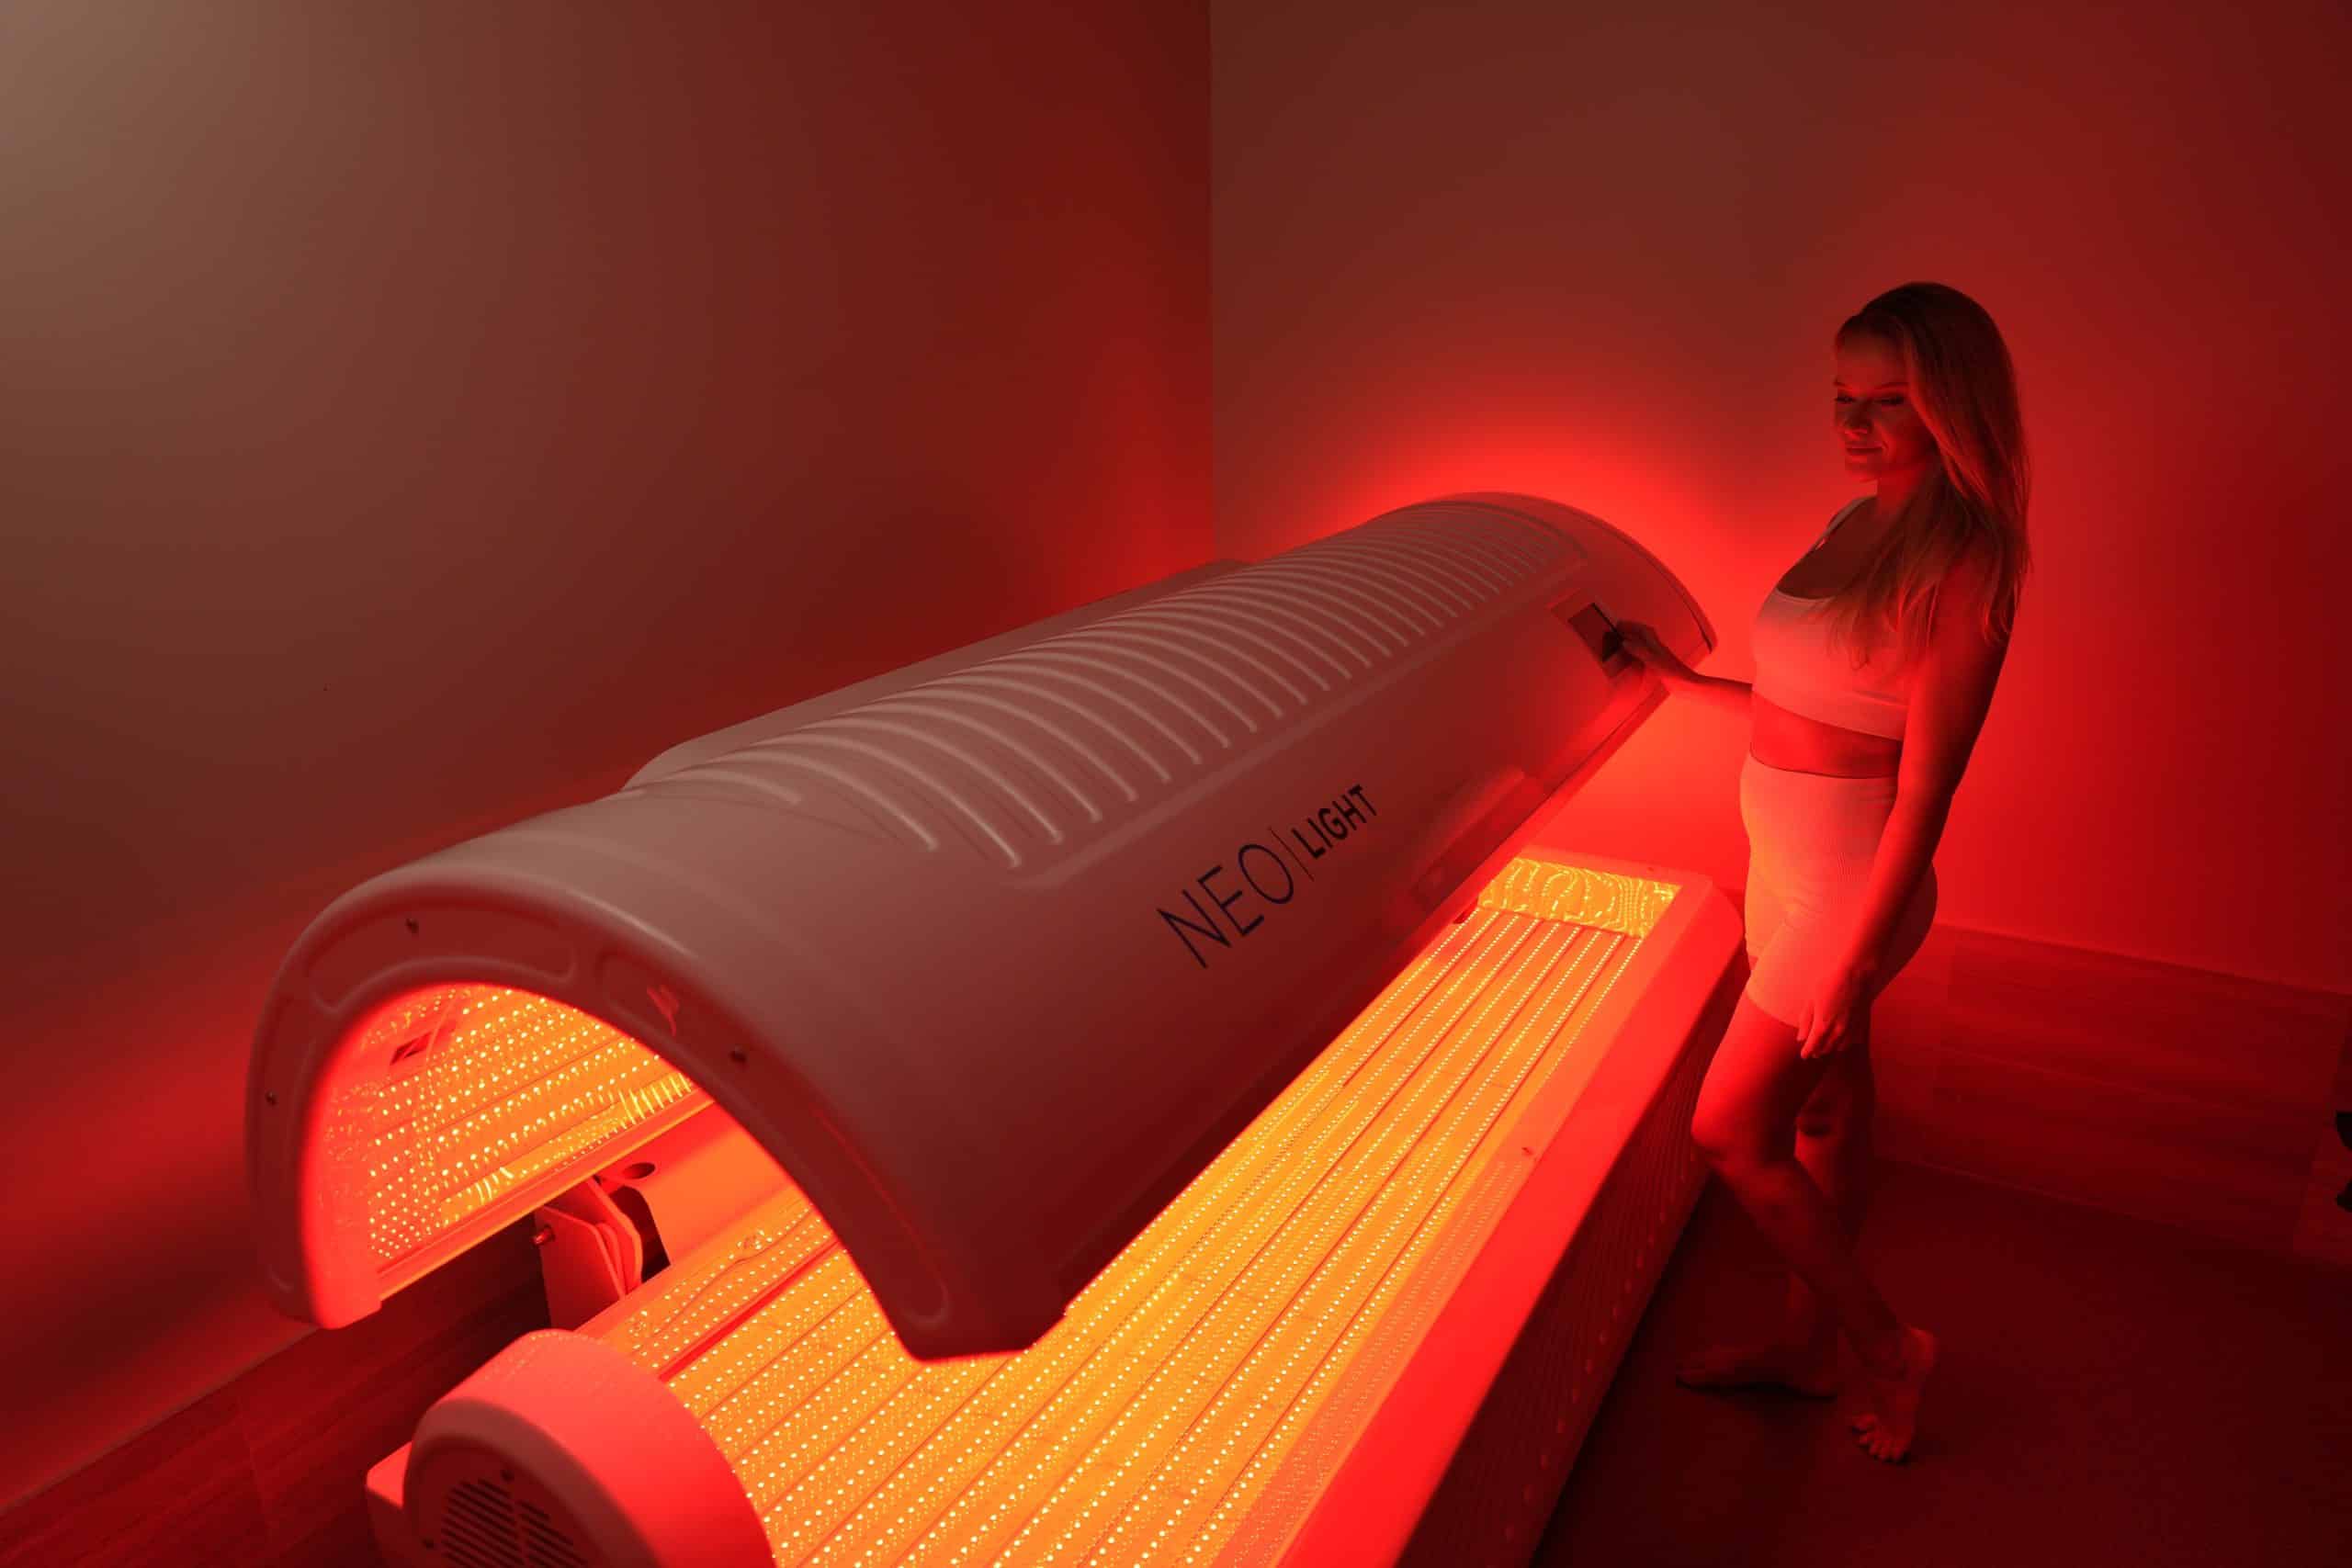 What Is Red Light Therapy Good For? How Often Should It Be Used For Health Benefits?